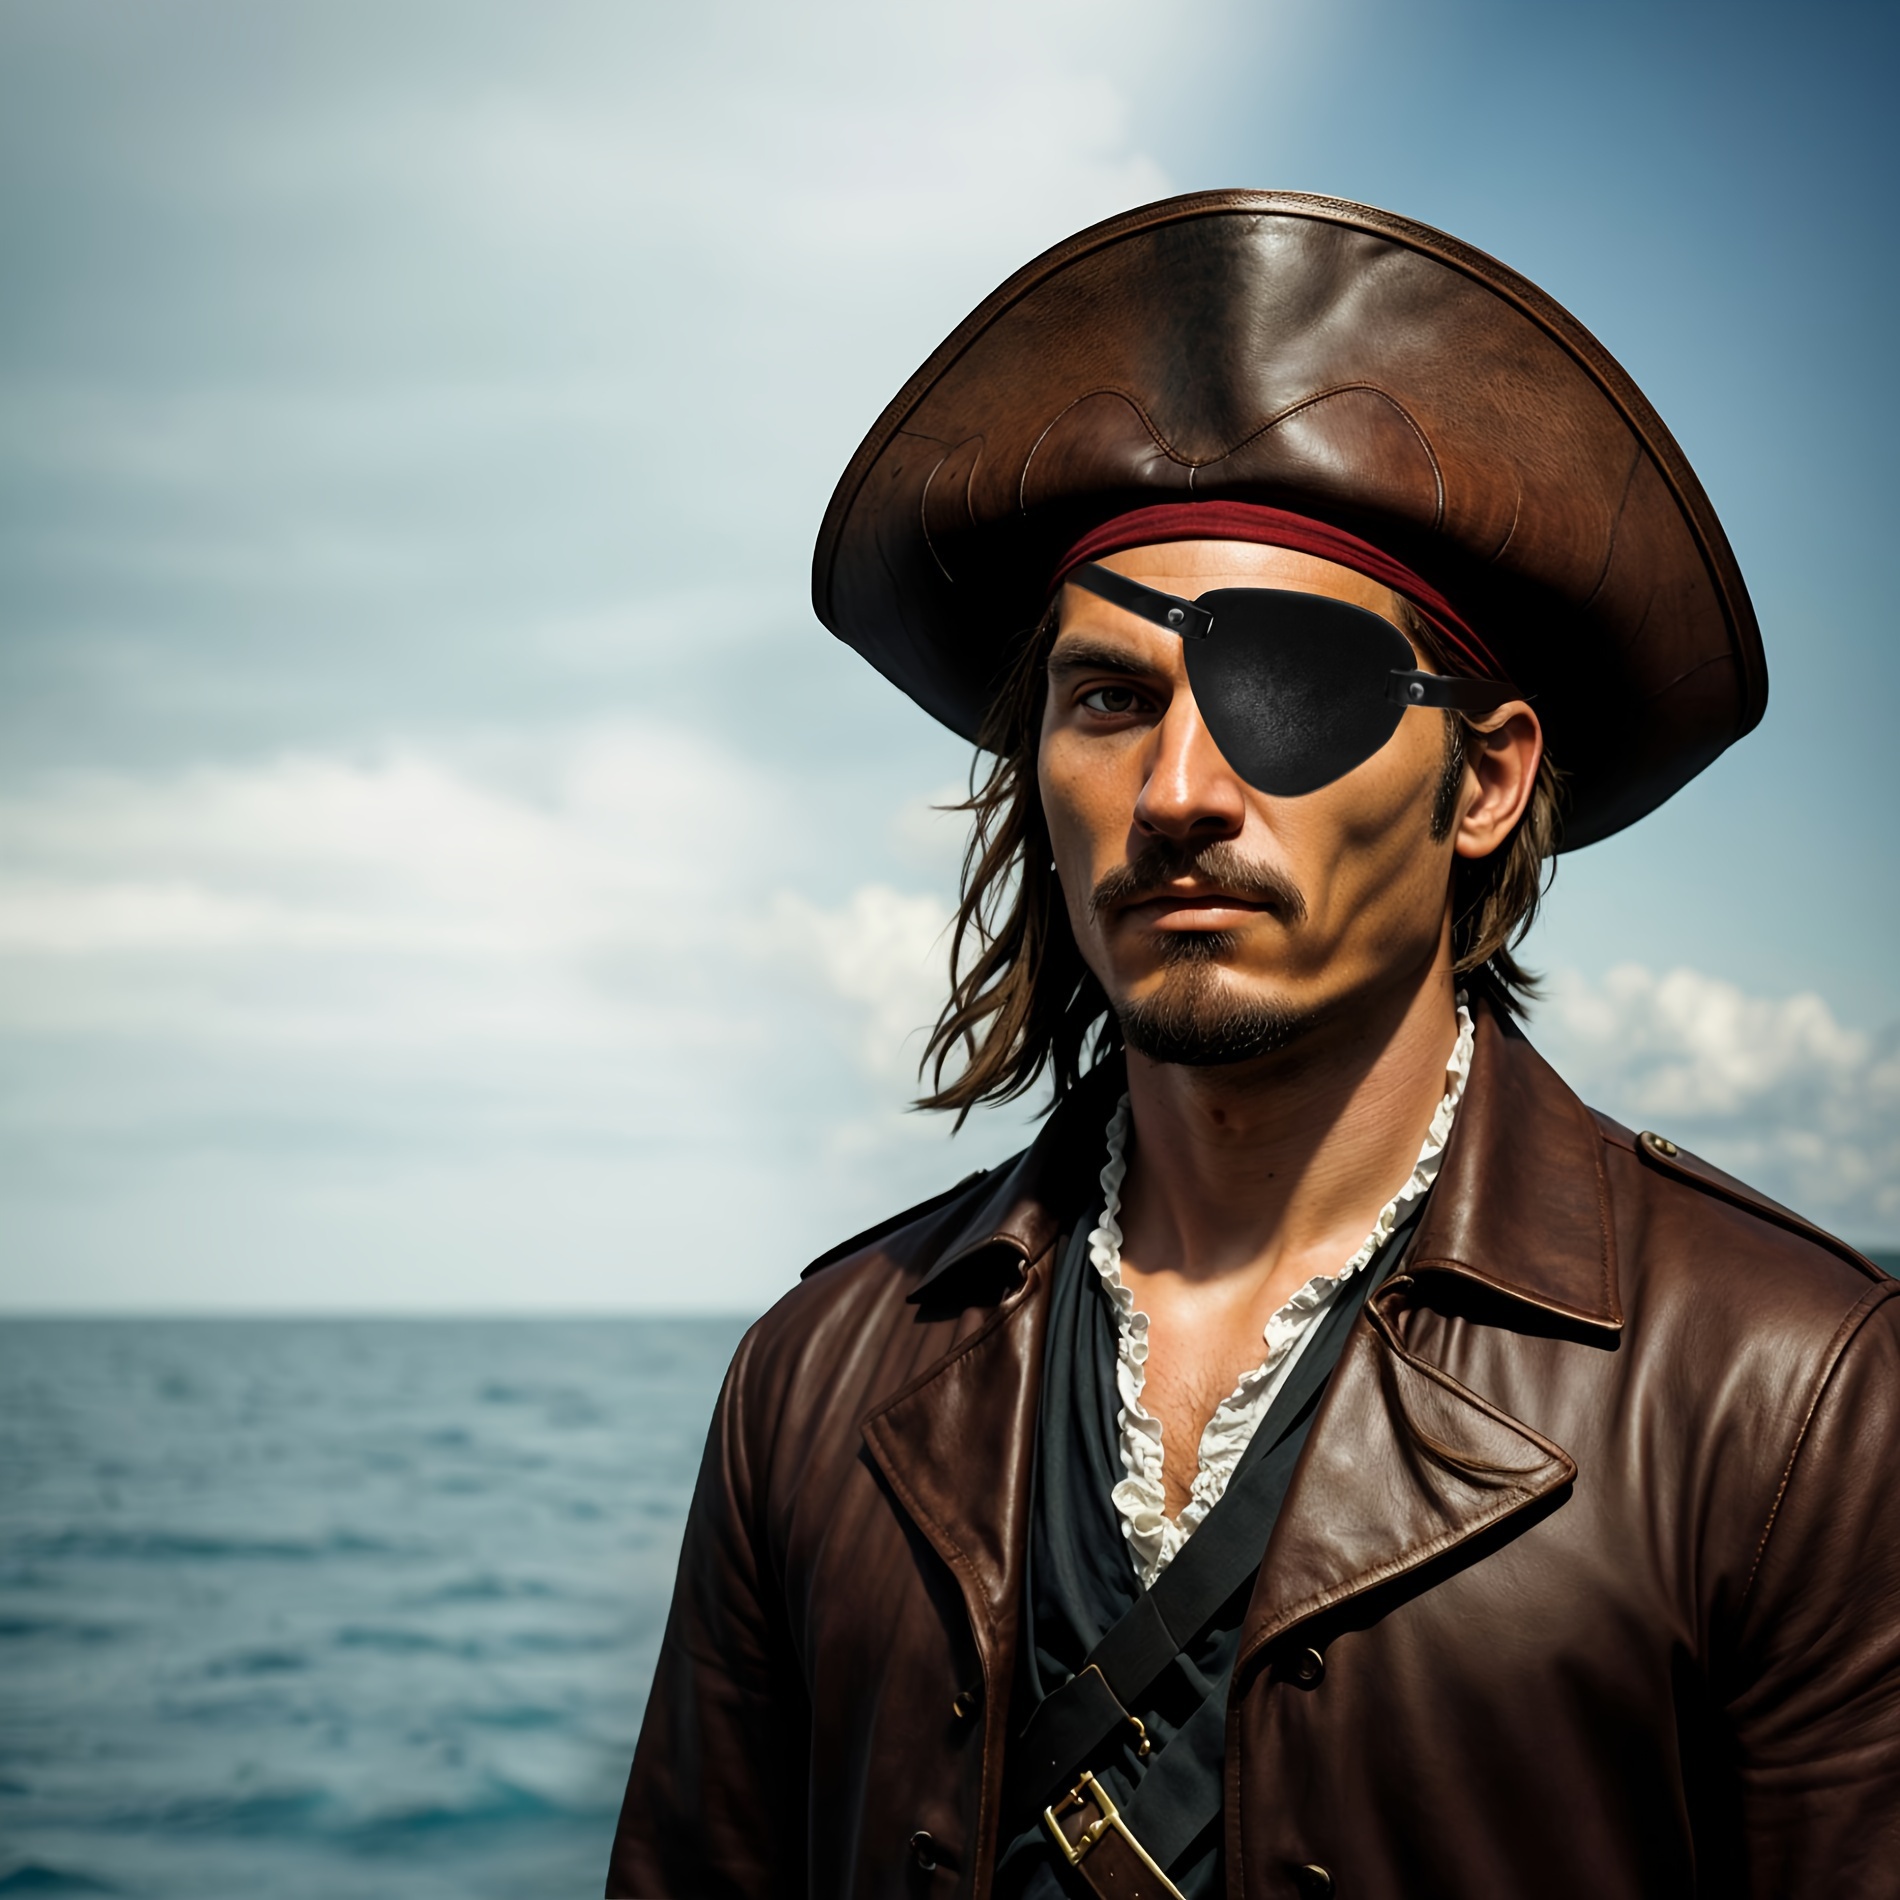 Pirate Eye Patches For Adults Retro PU Leather Eye Patch Retro PU